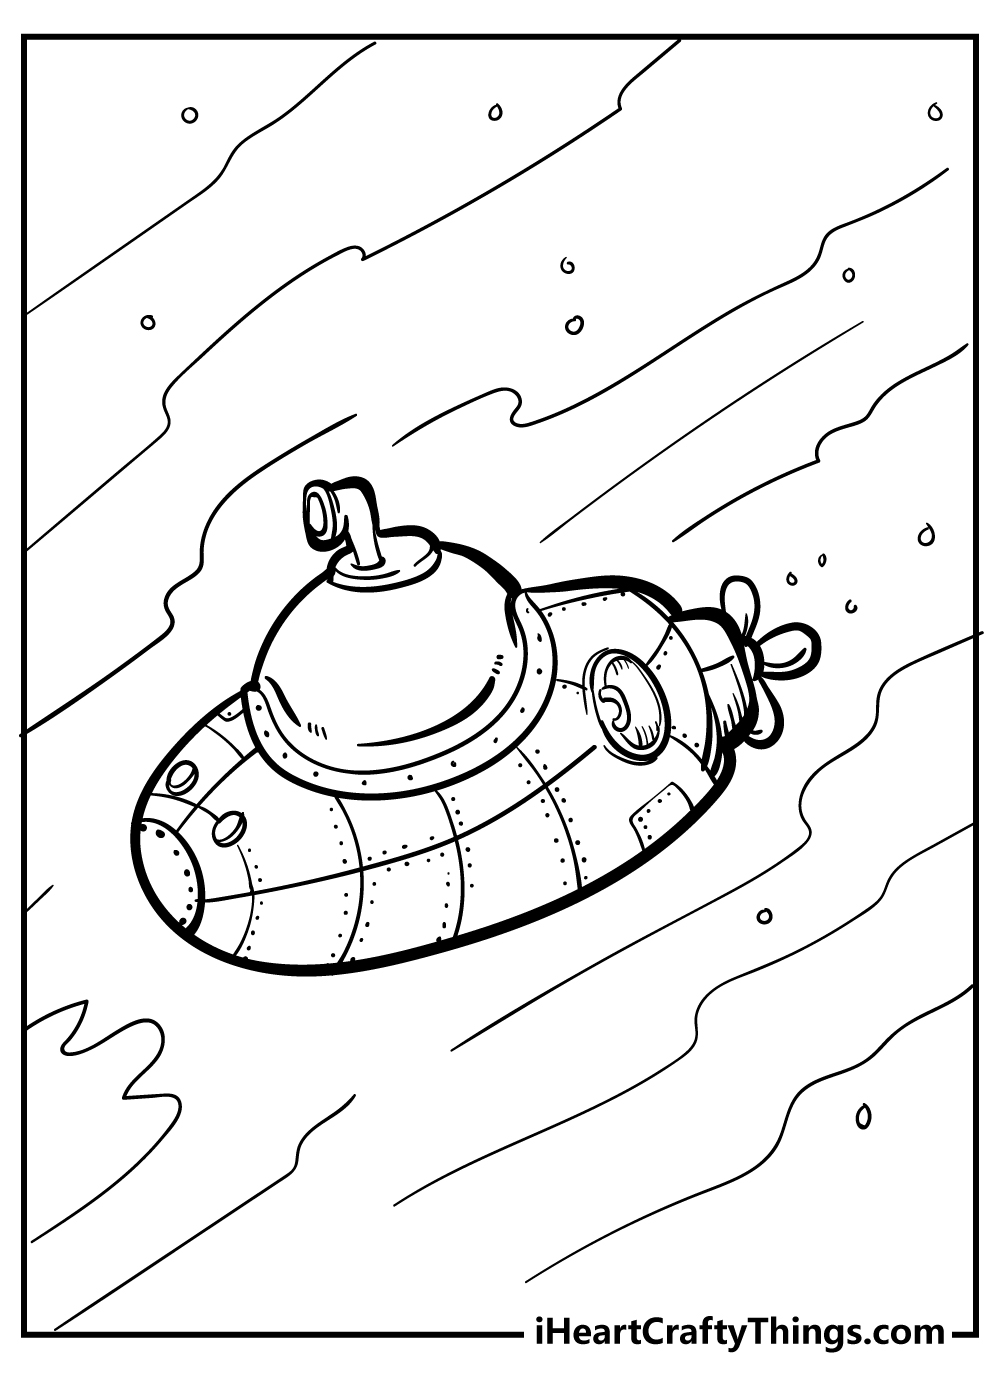 Submarine Coloring Pages free pdf download